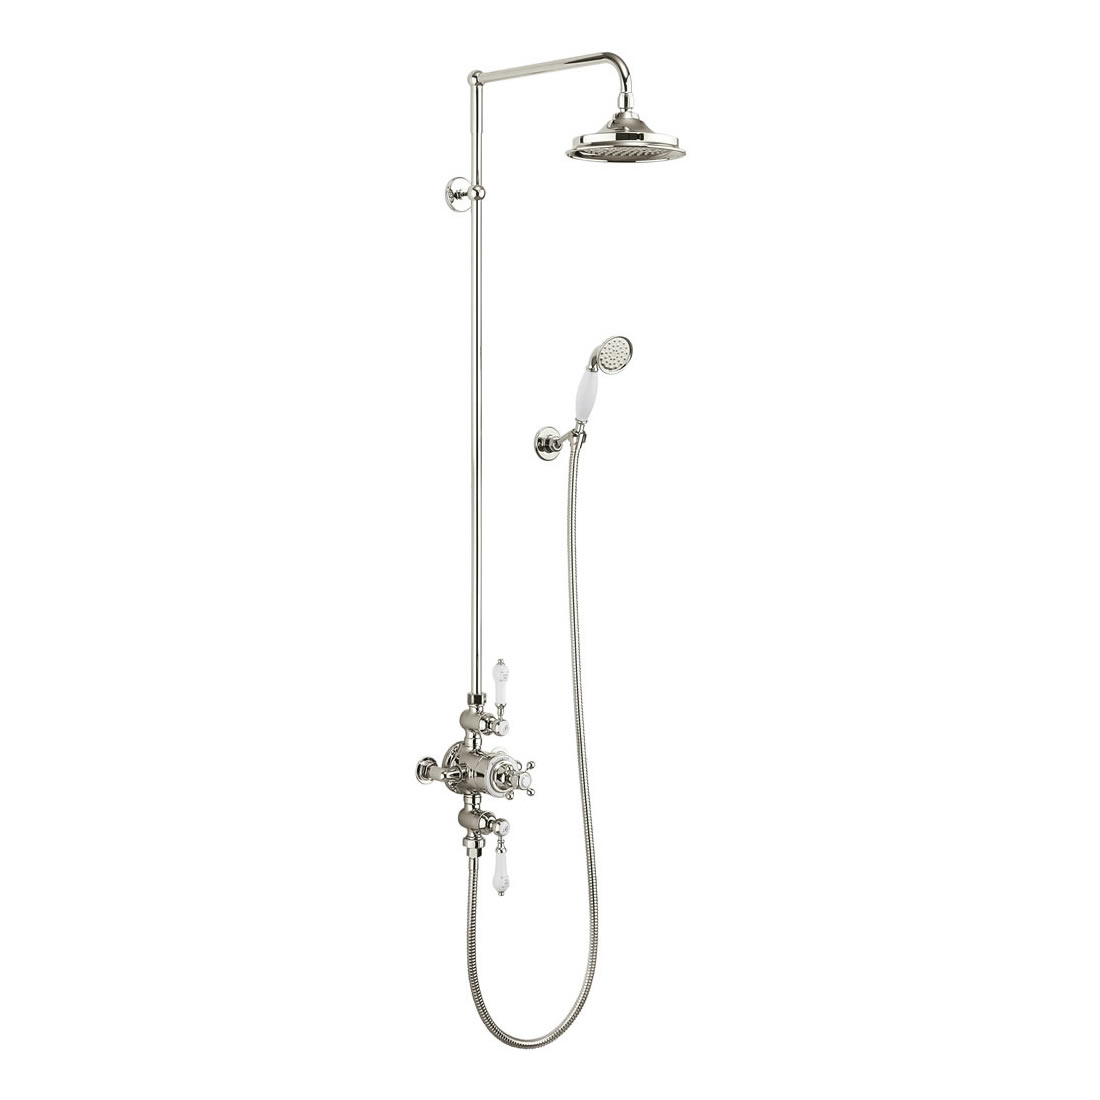 Avon Thermostatic Exposed Shower Valve Two Outlet,Rigid Riser, Swivel Shower Arm, Handset & Holder with Hose with 9 inch rose  - NICKEL